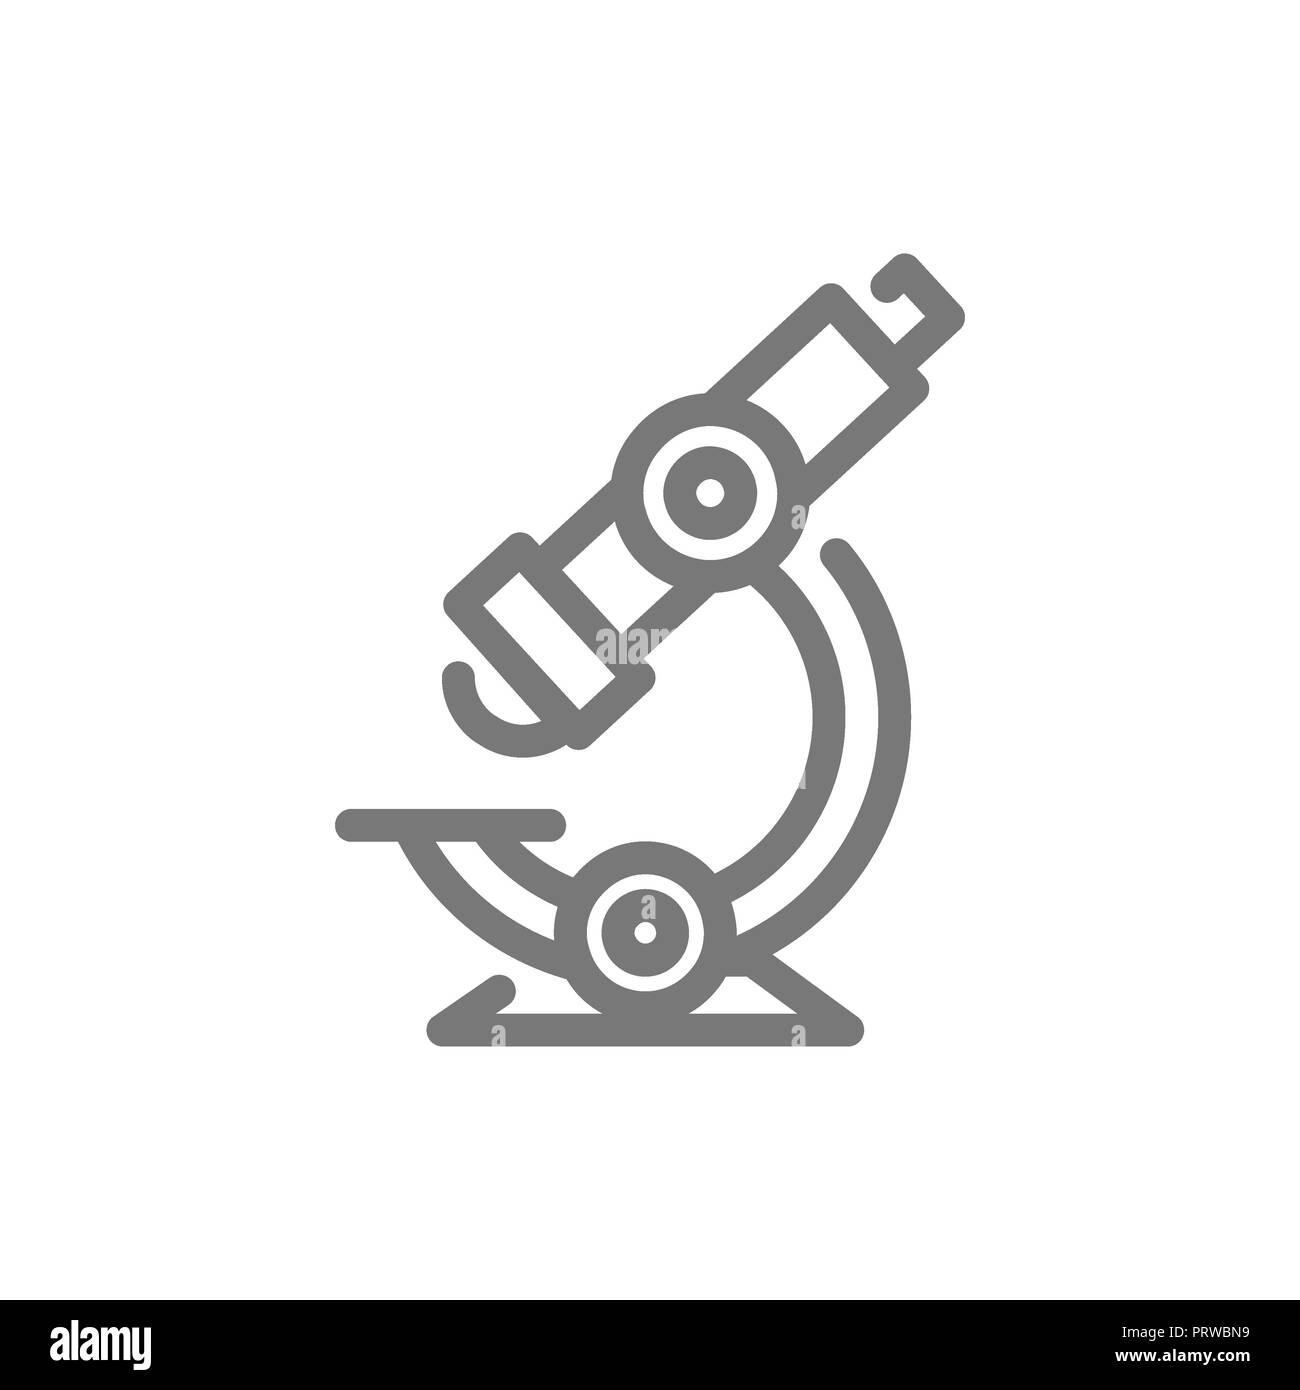 Simple microscope line icon. Symbol and sign illustration design. Isolated on white background Stock Photo